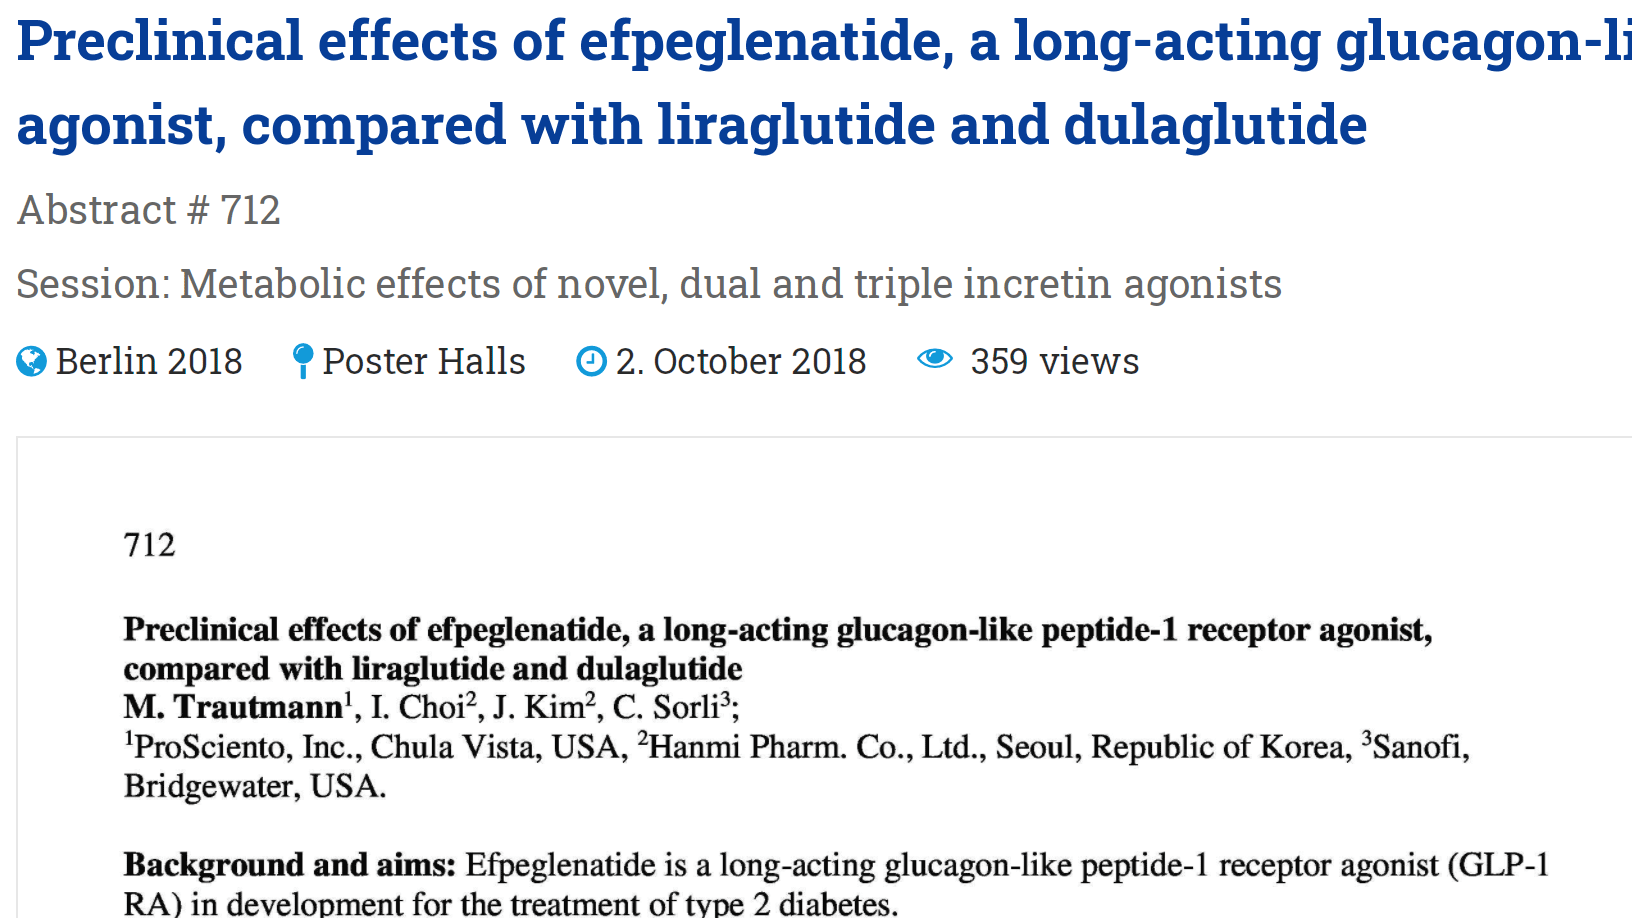 image of Preclinical effects of efpeglenatide, a long-acting glucagon-like peptide-1 receptor agonist, compared with liraglutide and dulaglutide